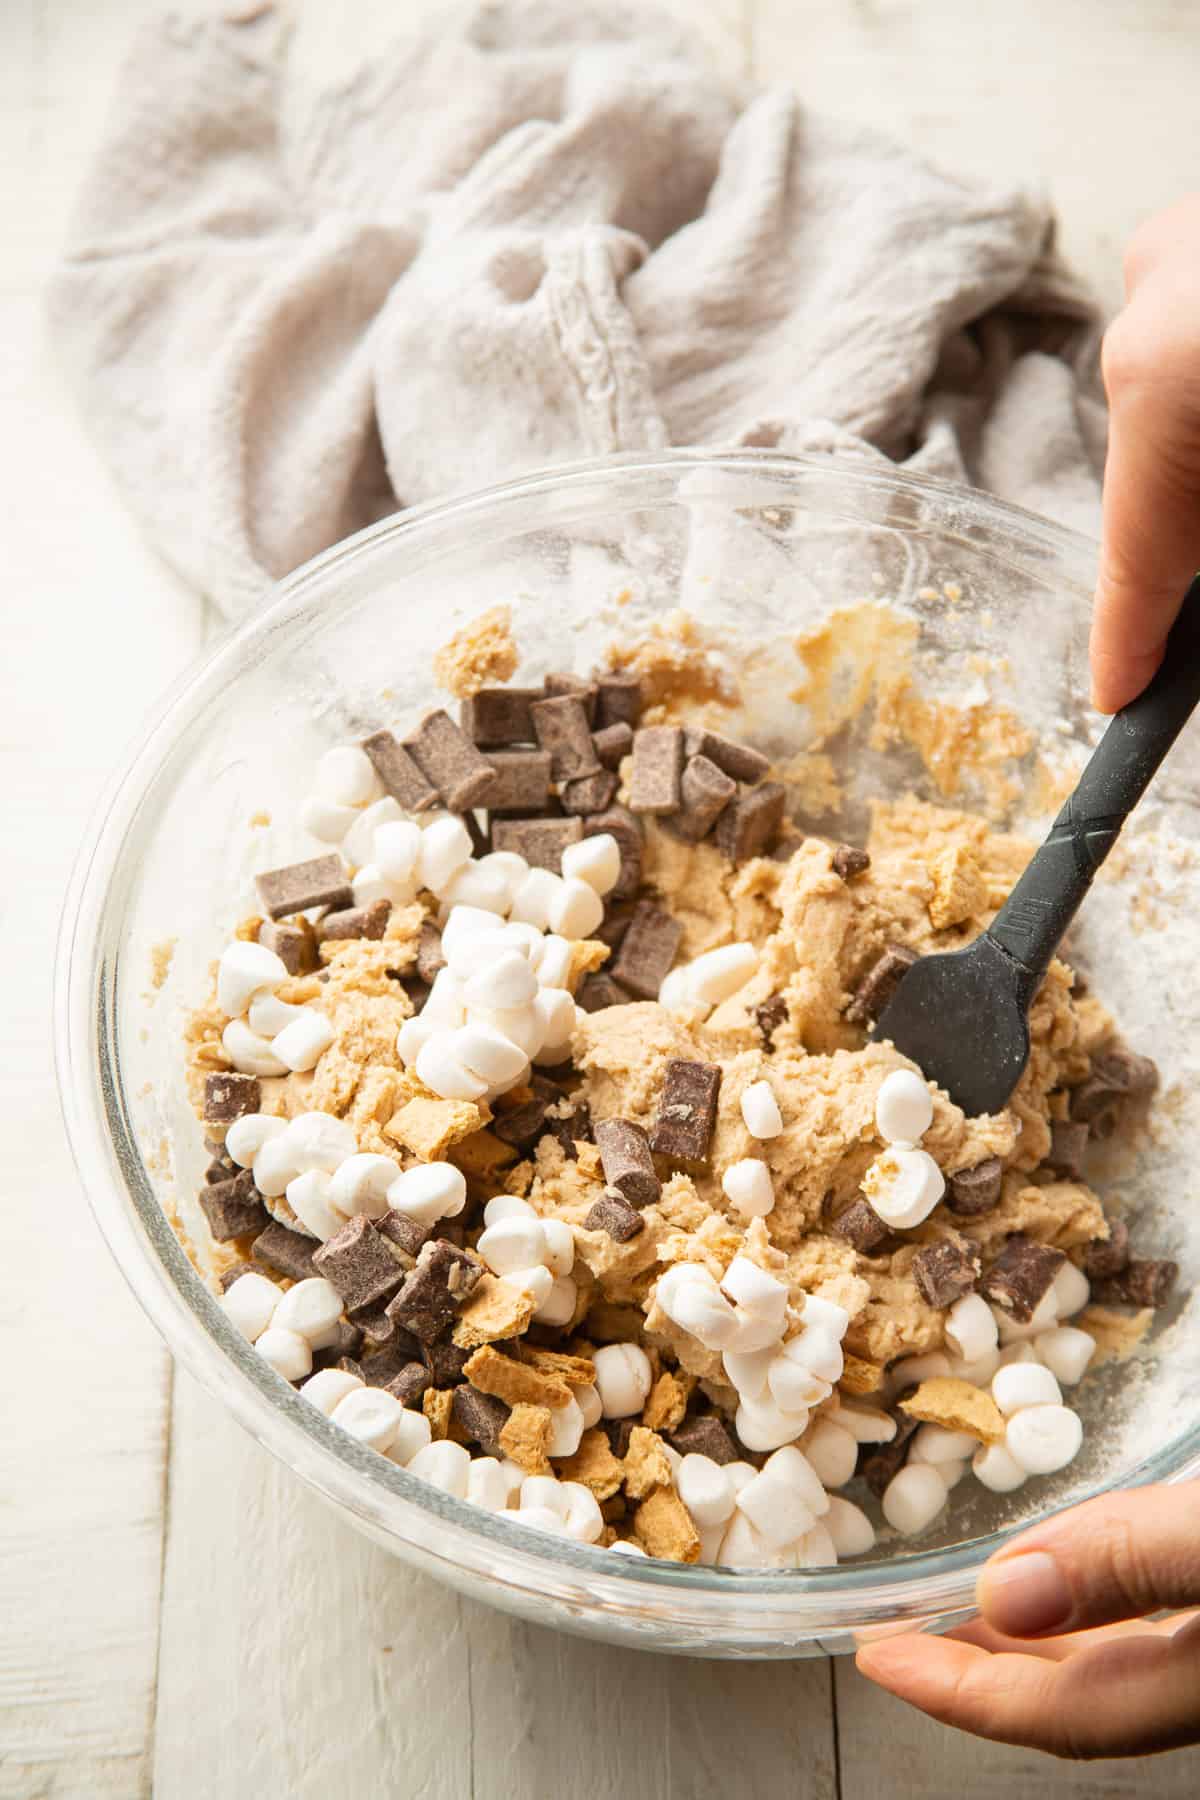 Hand stirring marshmallows, chocolate chips and graham cracker pieces into a bowl of Vegan S'mores Cookie dough.